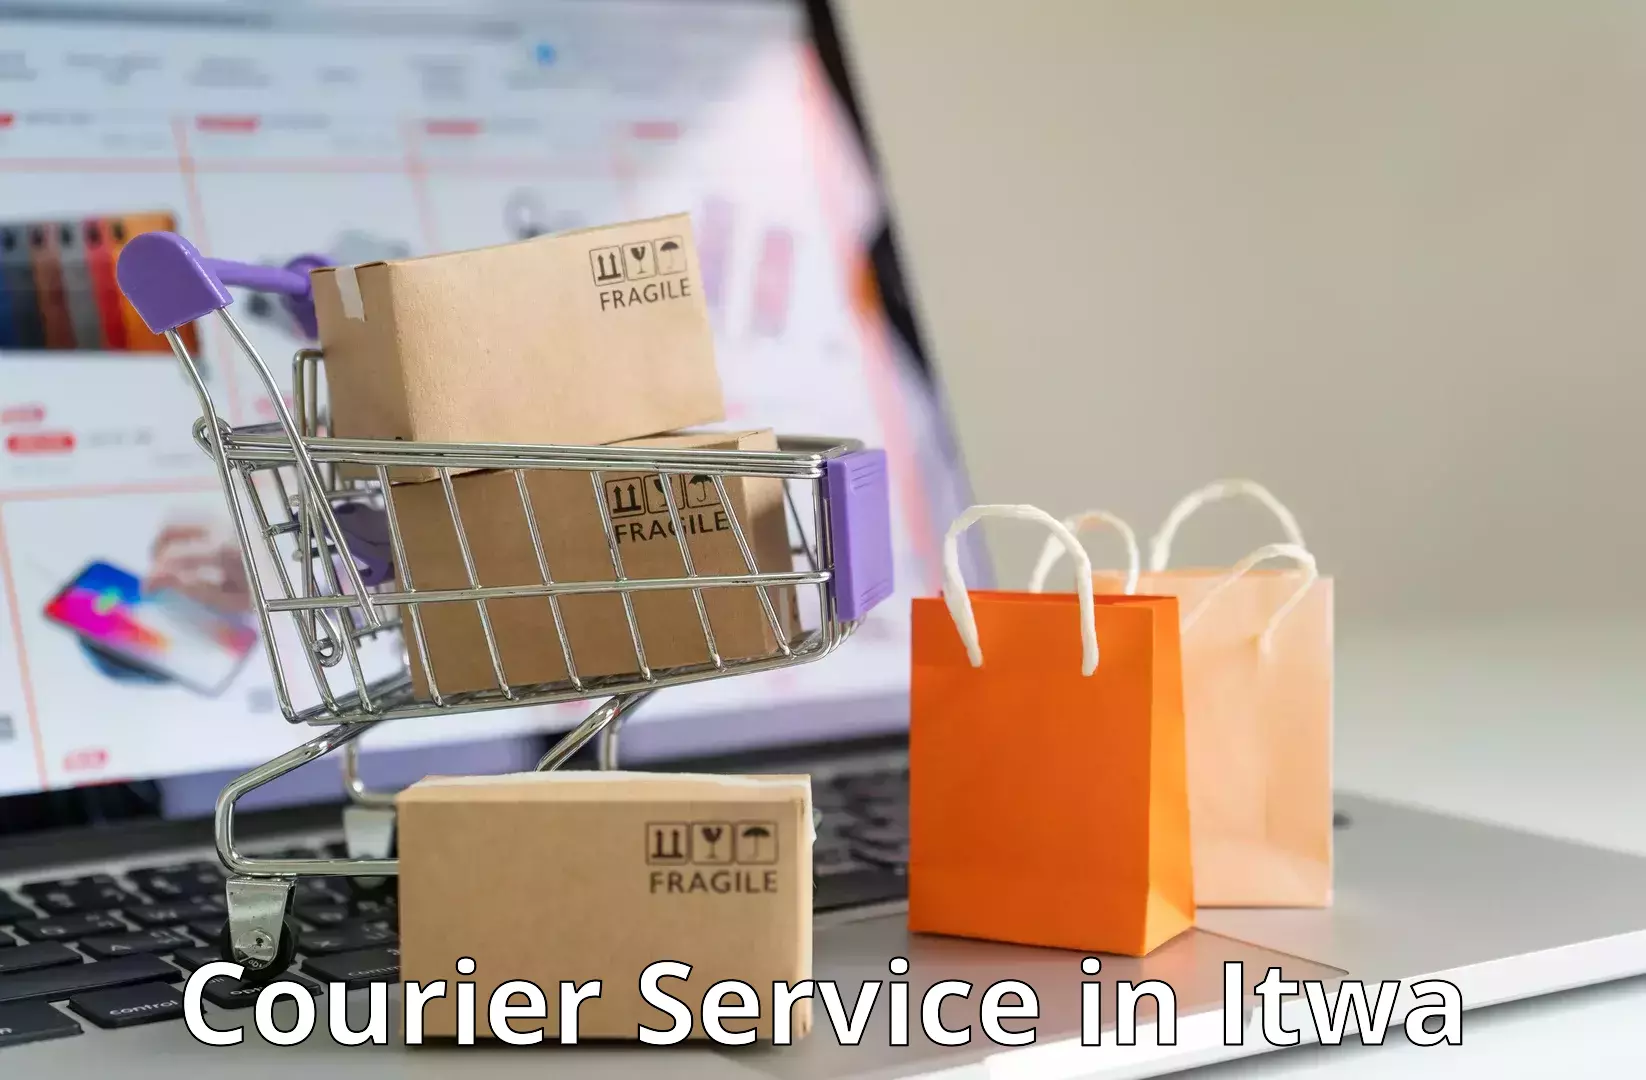 Courier service innovation in Itwa